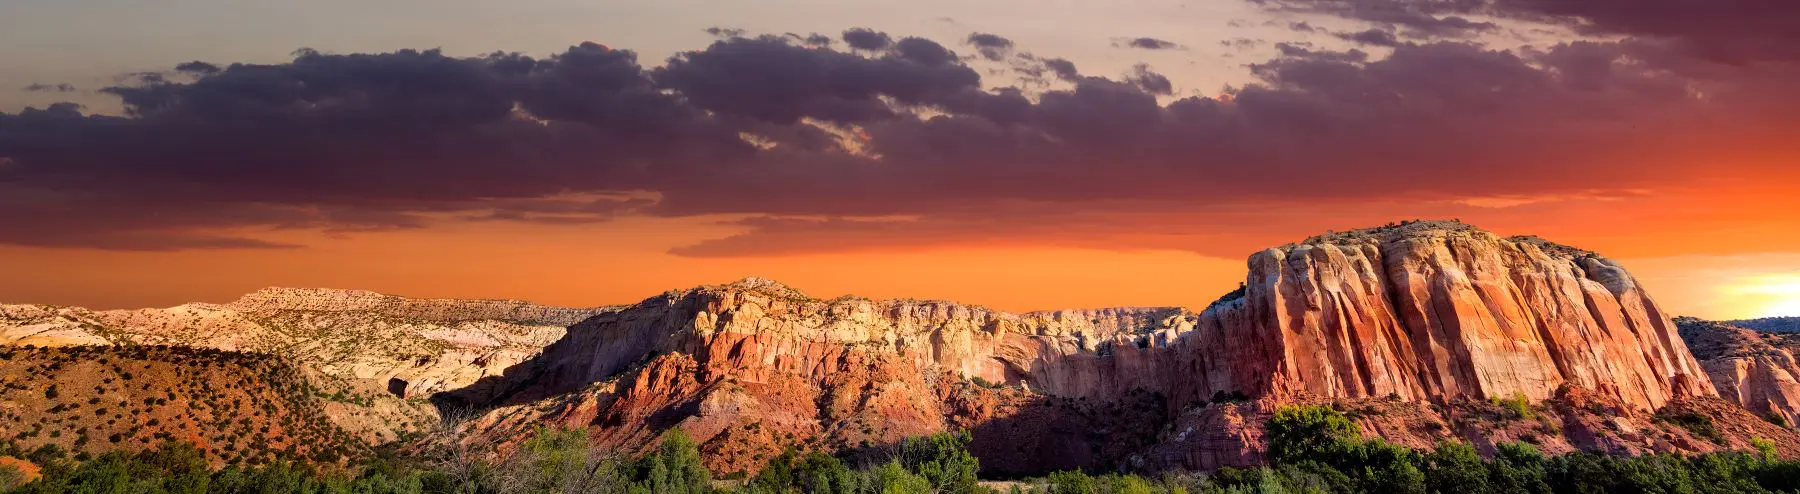 Scenic view of Ghost Ranch, showing red rock formations and sunset sky, the location of the EMDR and Mindfulness retreat for licensed clinicians.